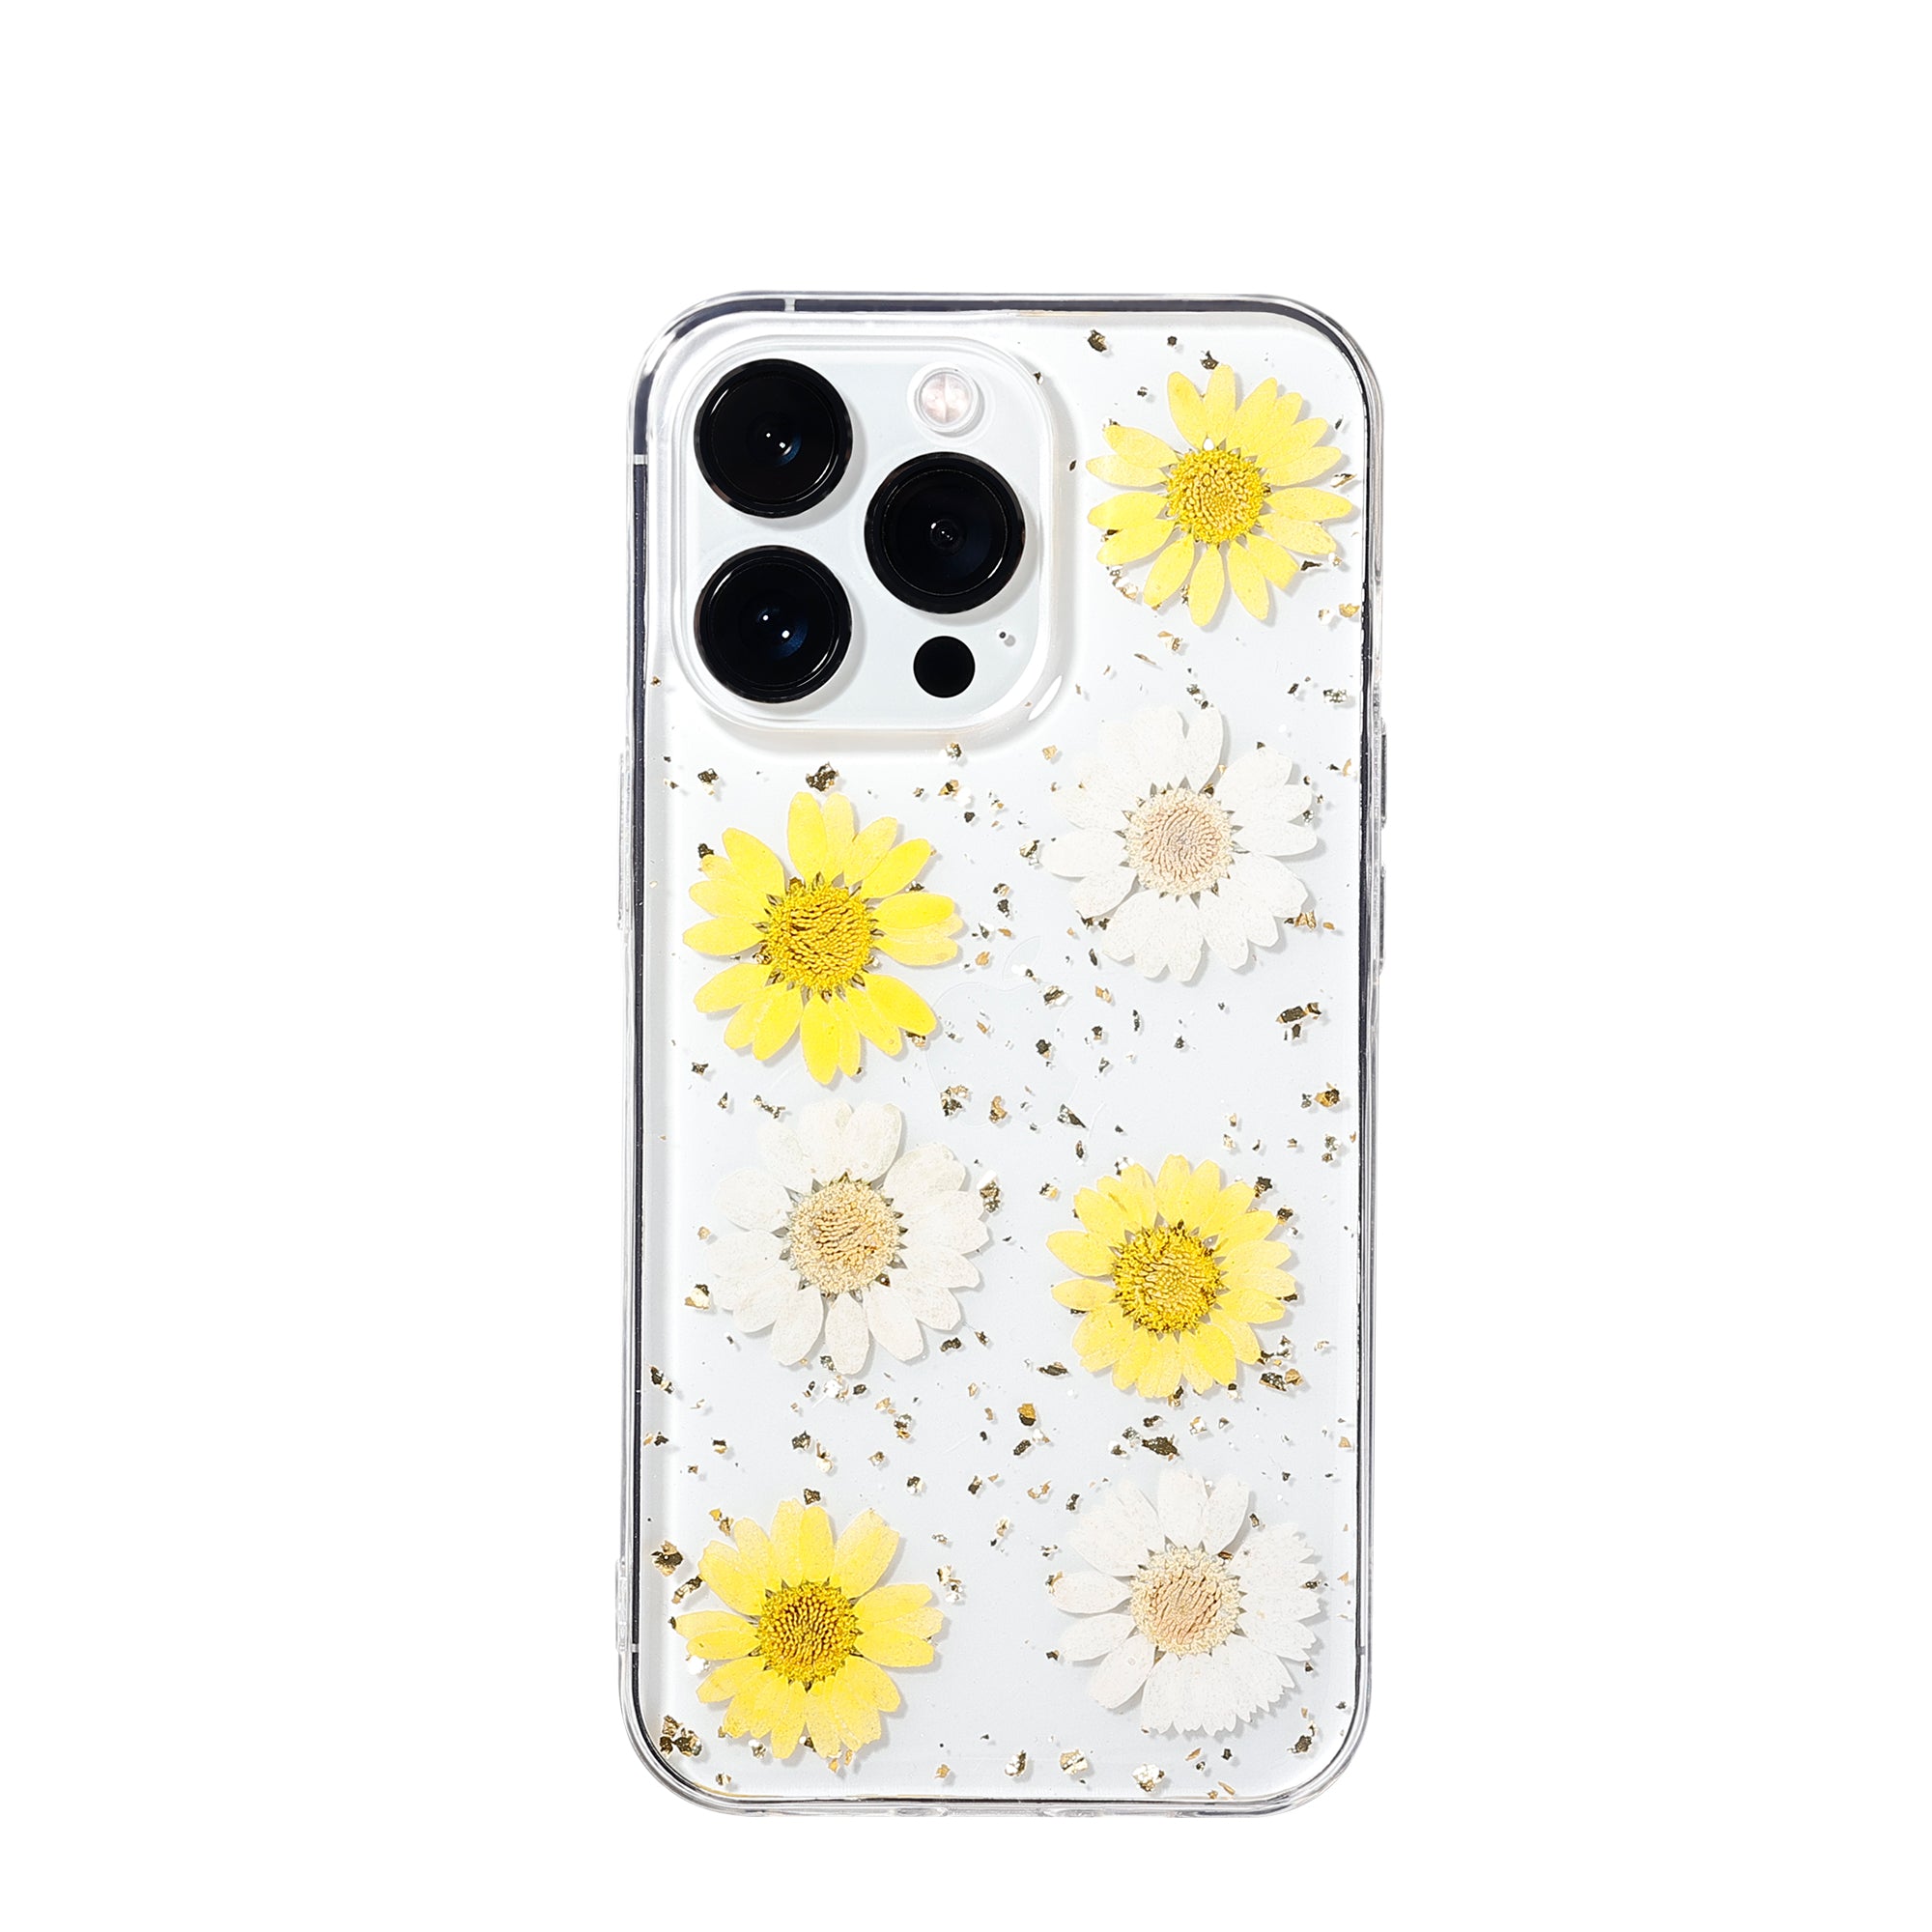 Sanne dried flowers phonecase